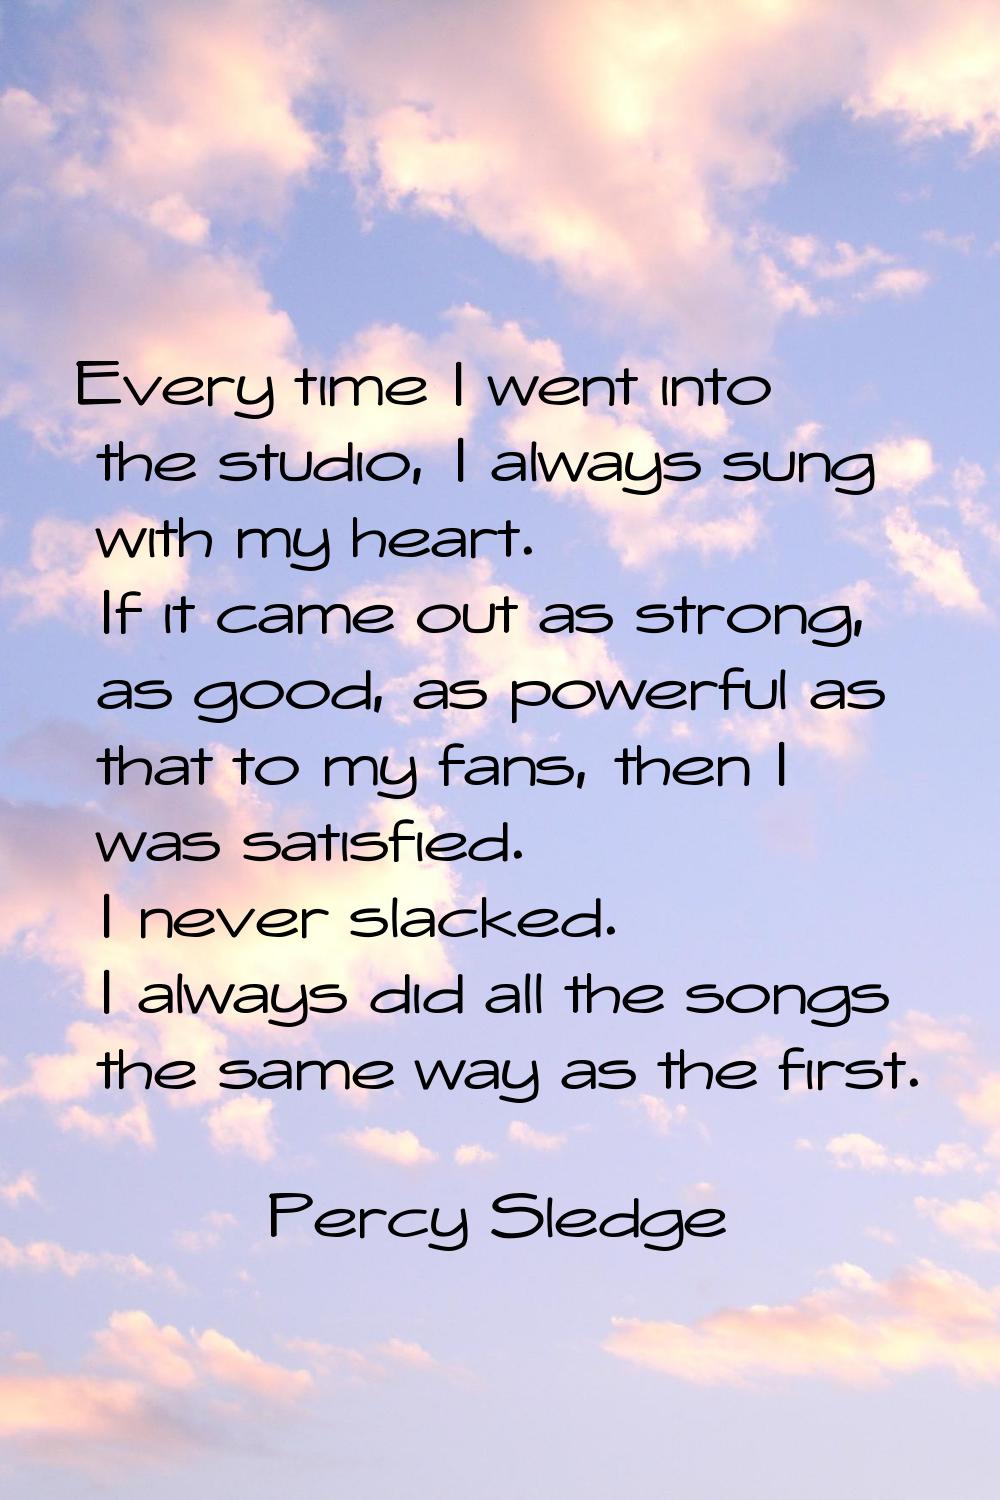 Every time I went into the studio, I always sung with my heart. If it came out as strong, as good, 